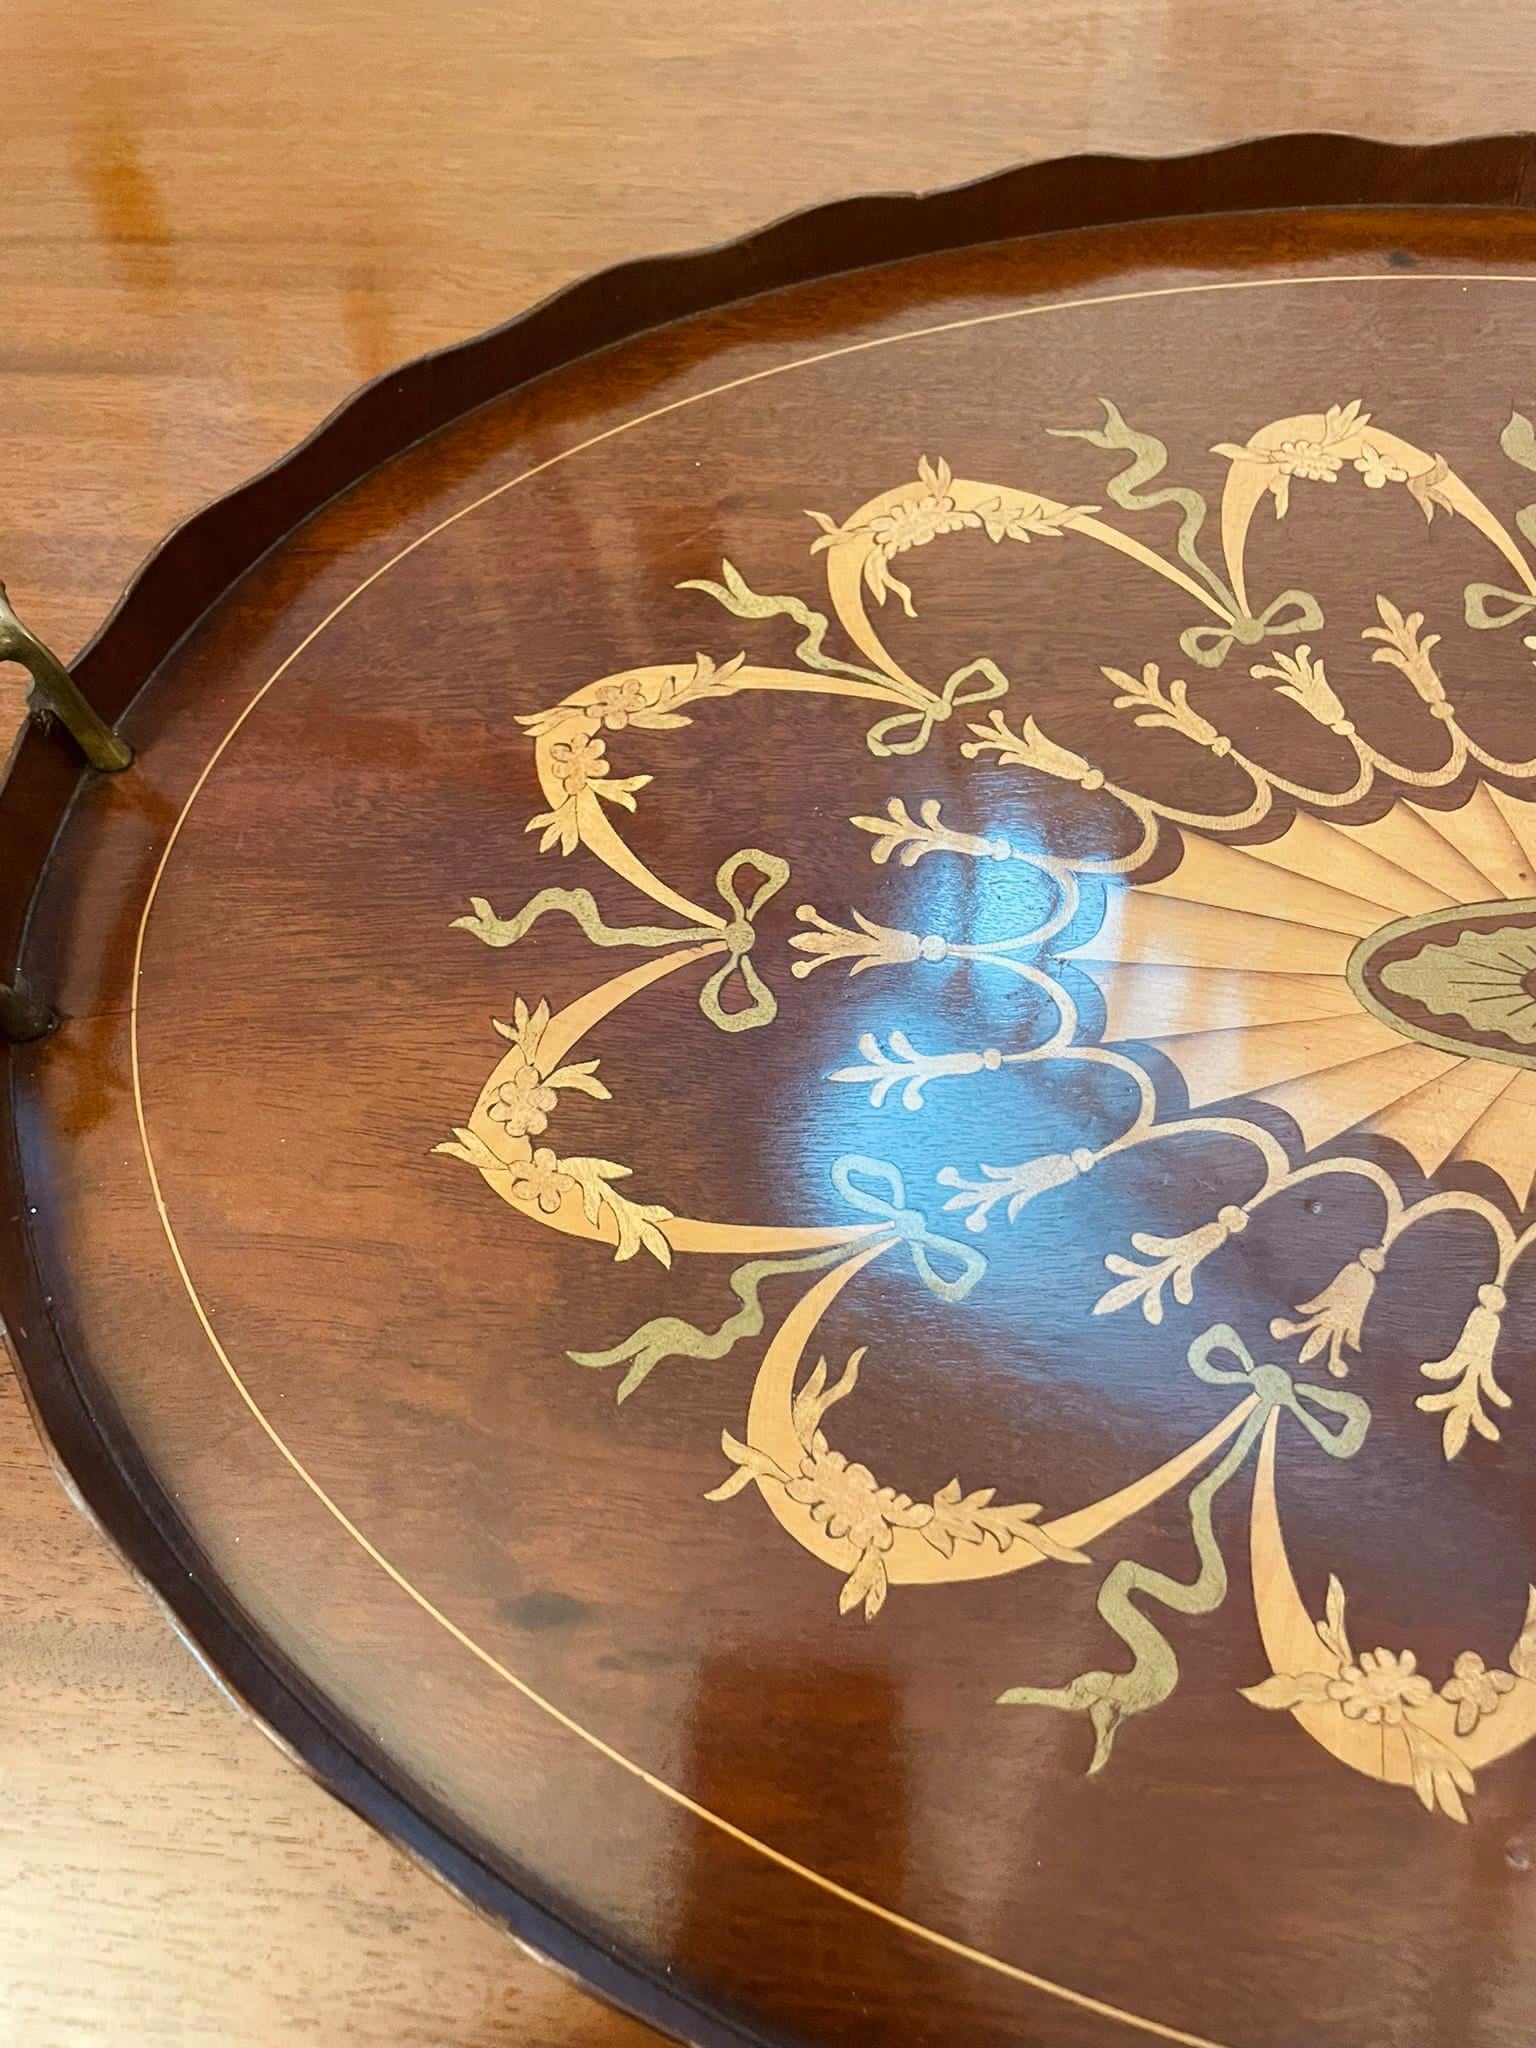 Outstanding Quality Edwardian Inlaid Mahogany Oval Tray In Good Condition For Sale In Suffolk, GB